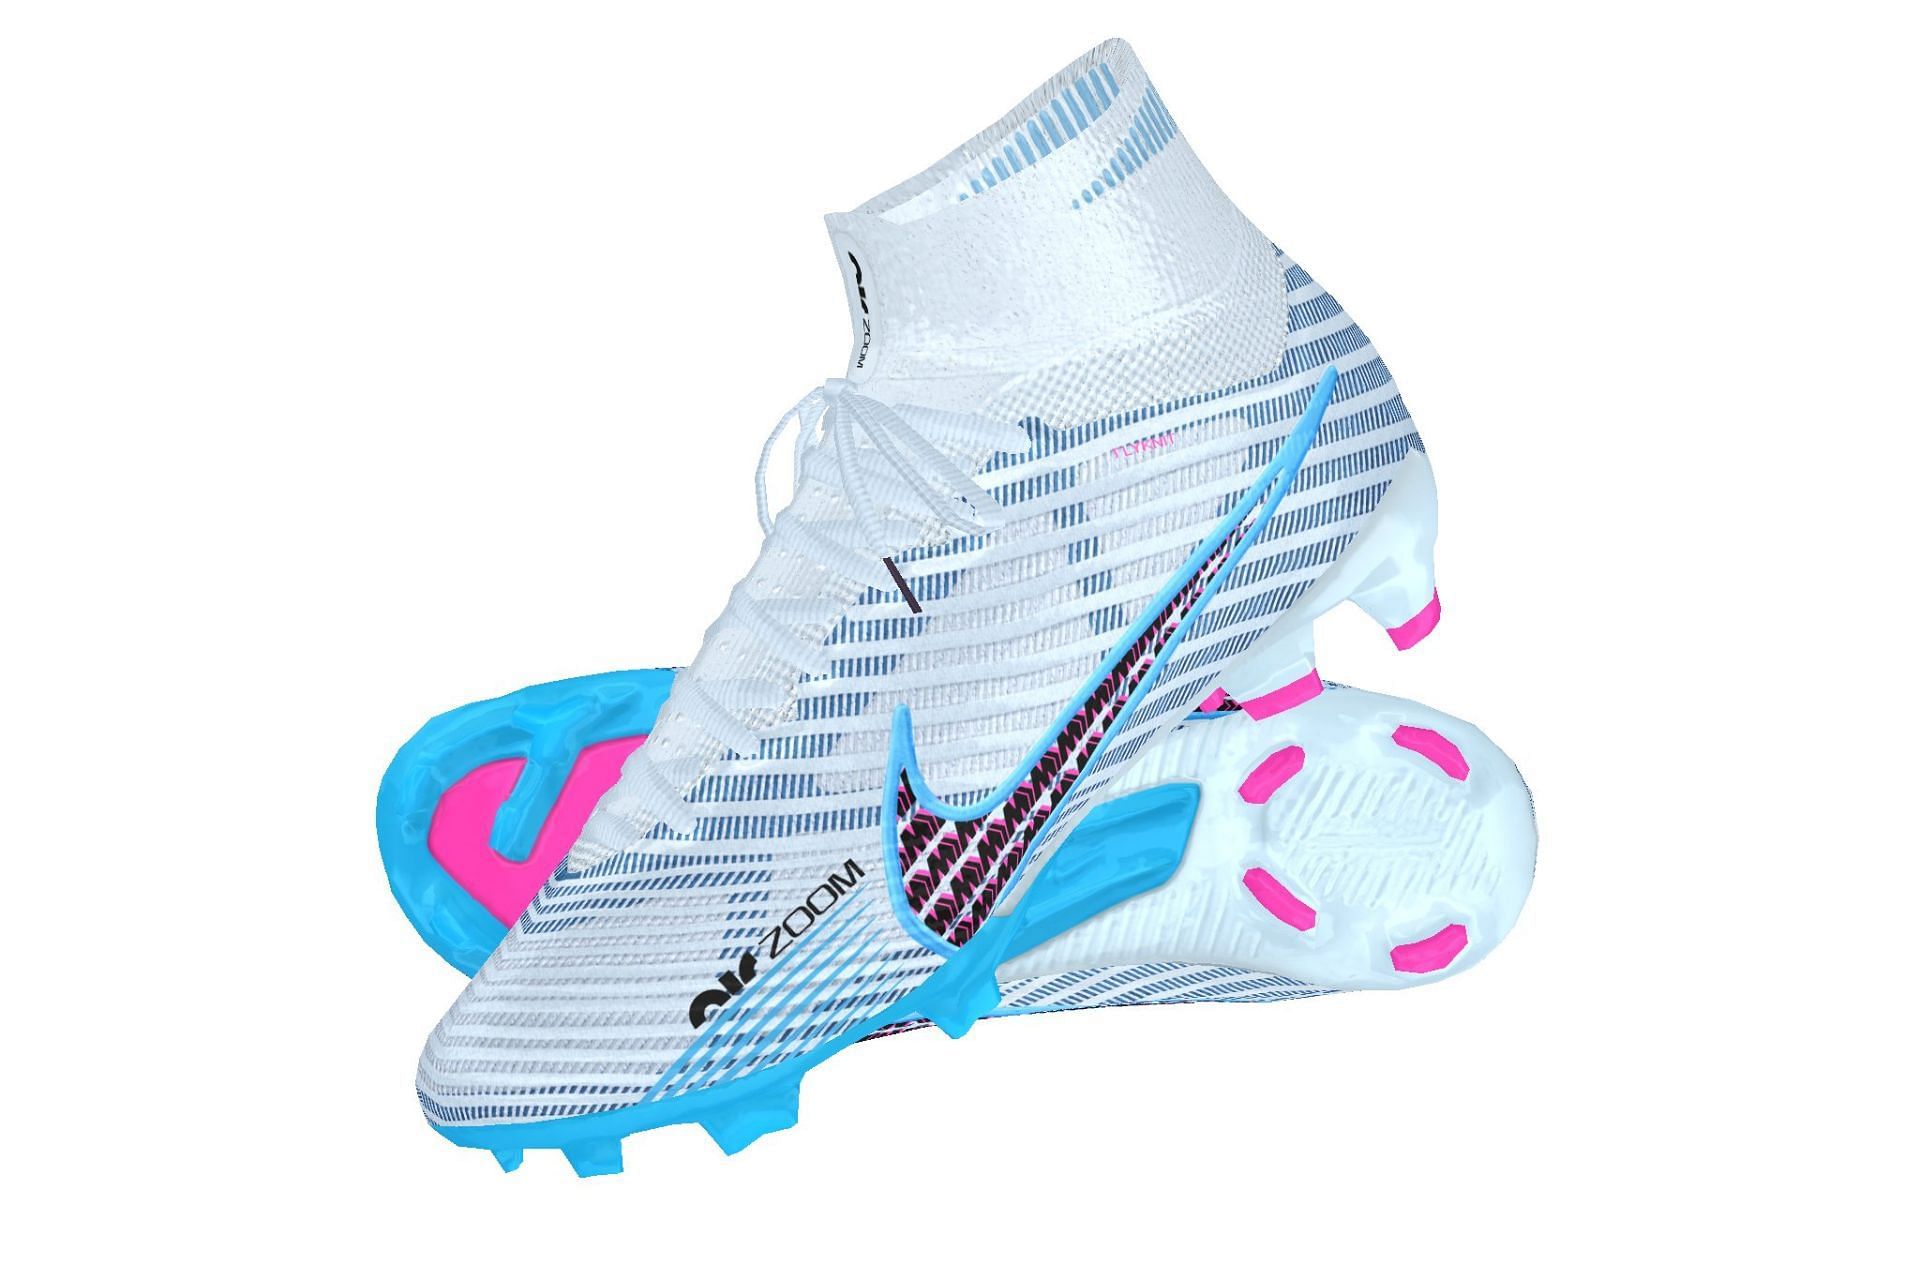 boots: Zoom Mercurial “White/Baltic Blue/Laser Pink” football boots: Where to buy, price, and more explored